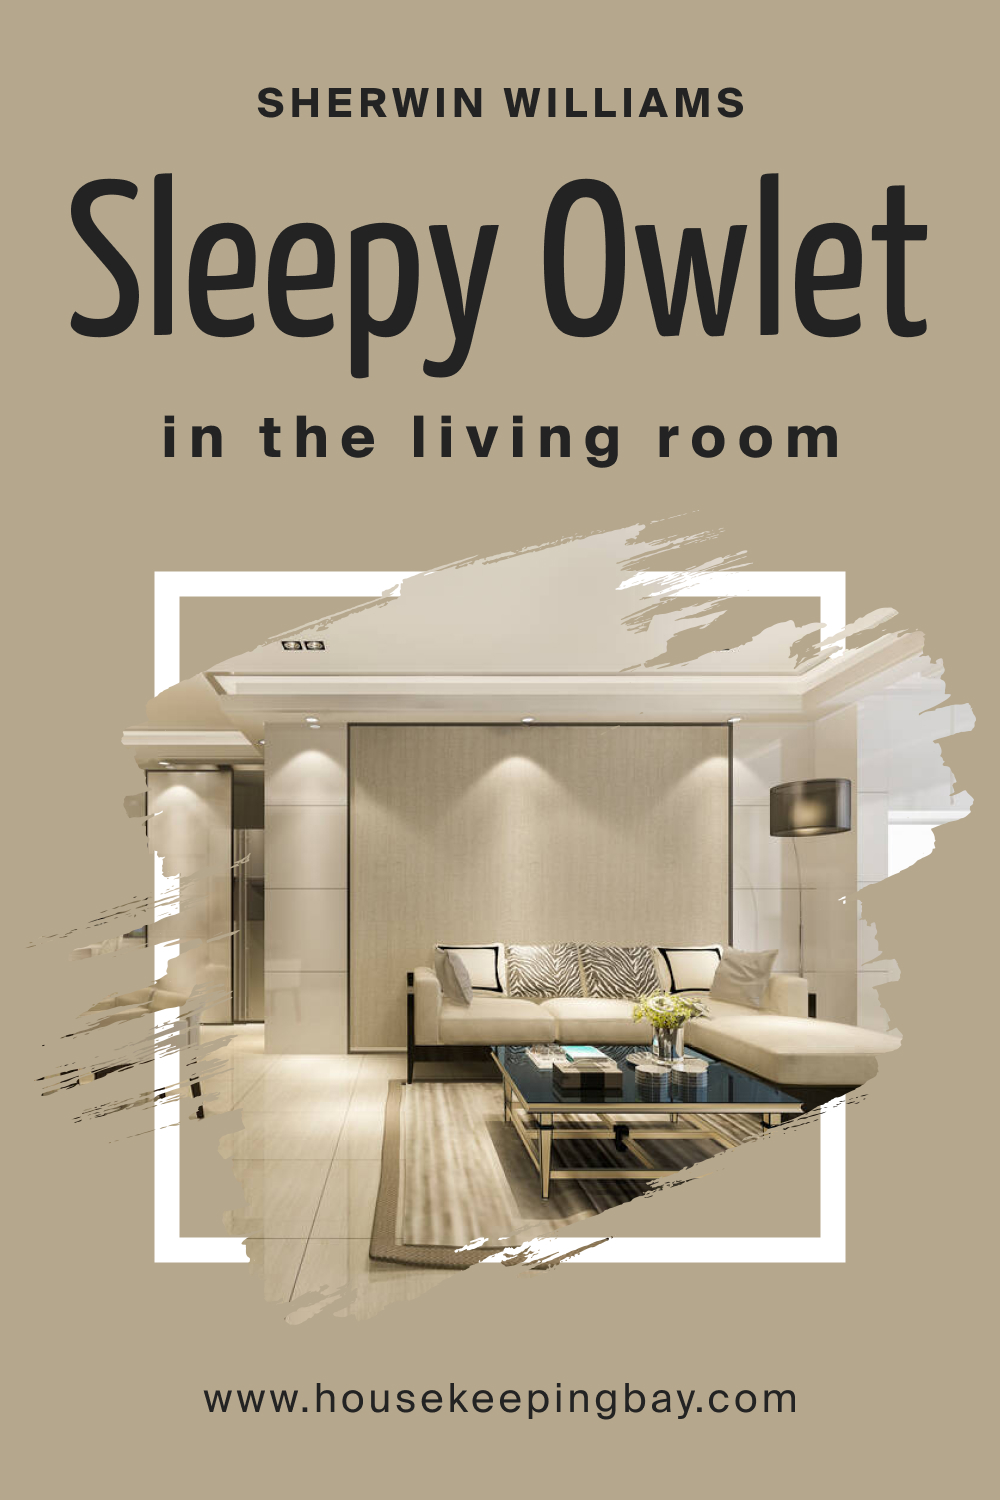 Sherwin Williams. SW 9513 Sleepy Owlet In the Living Room